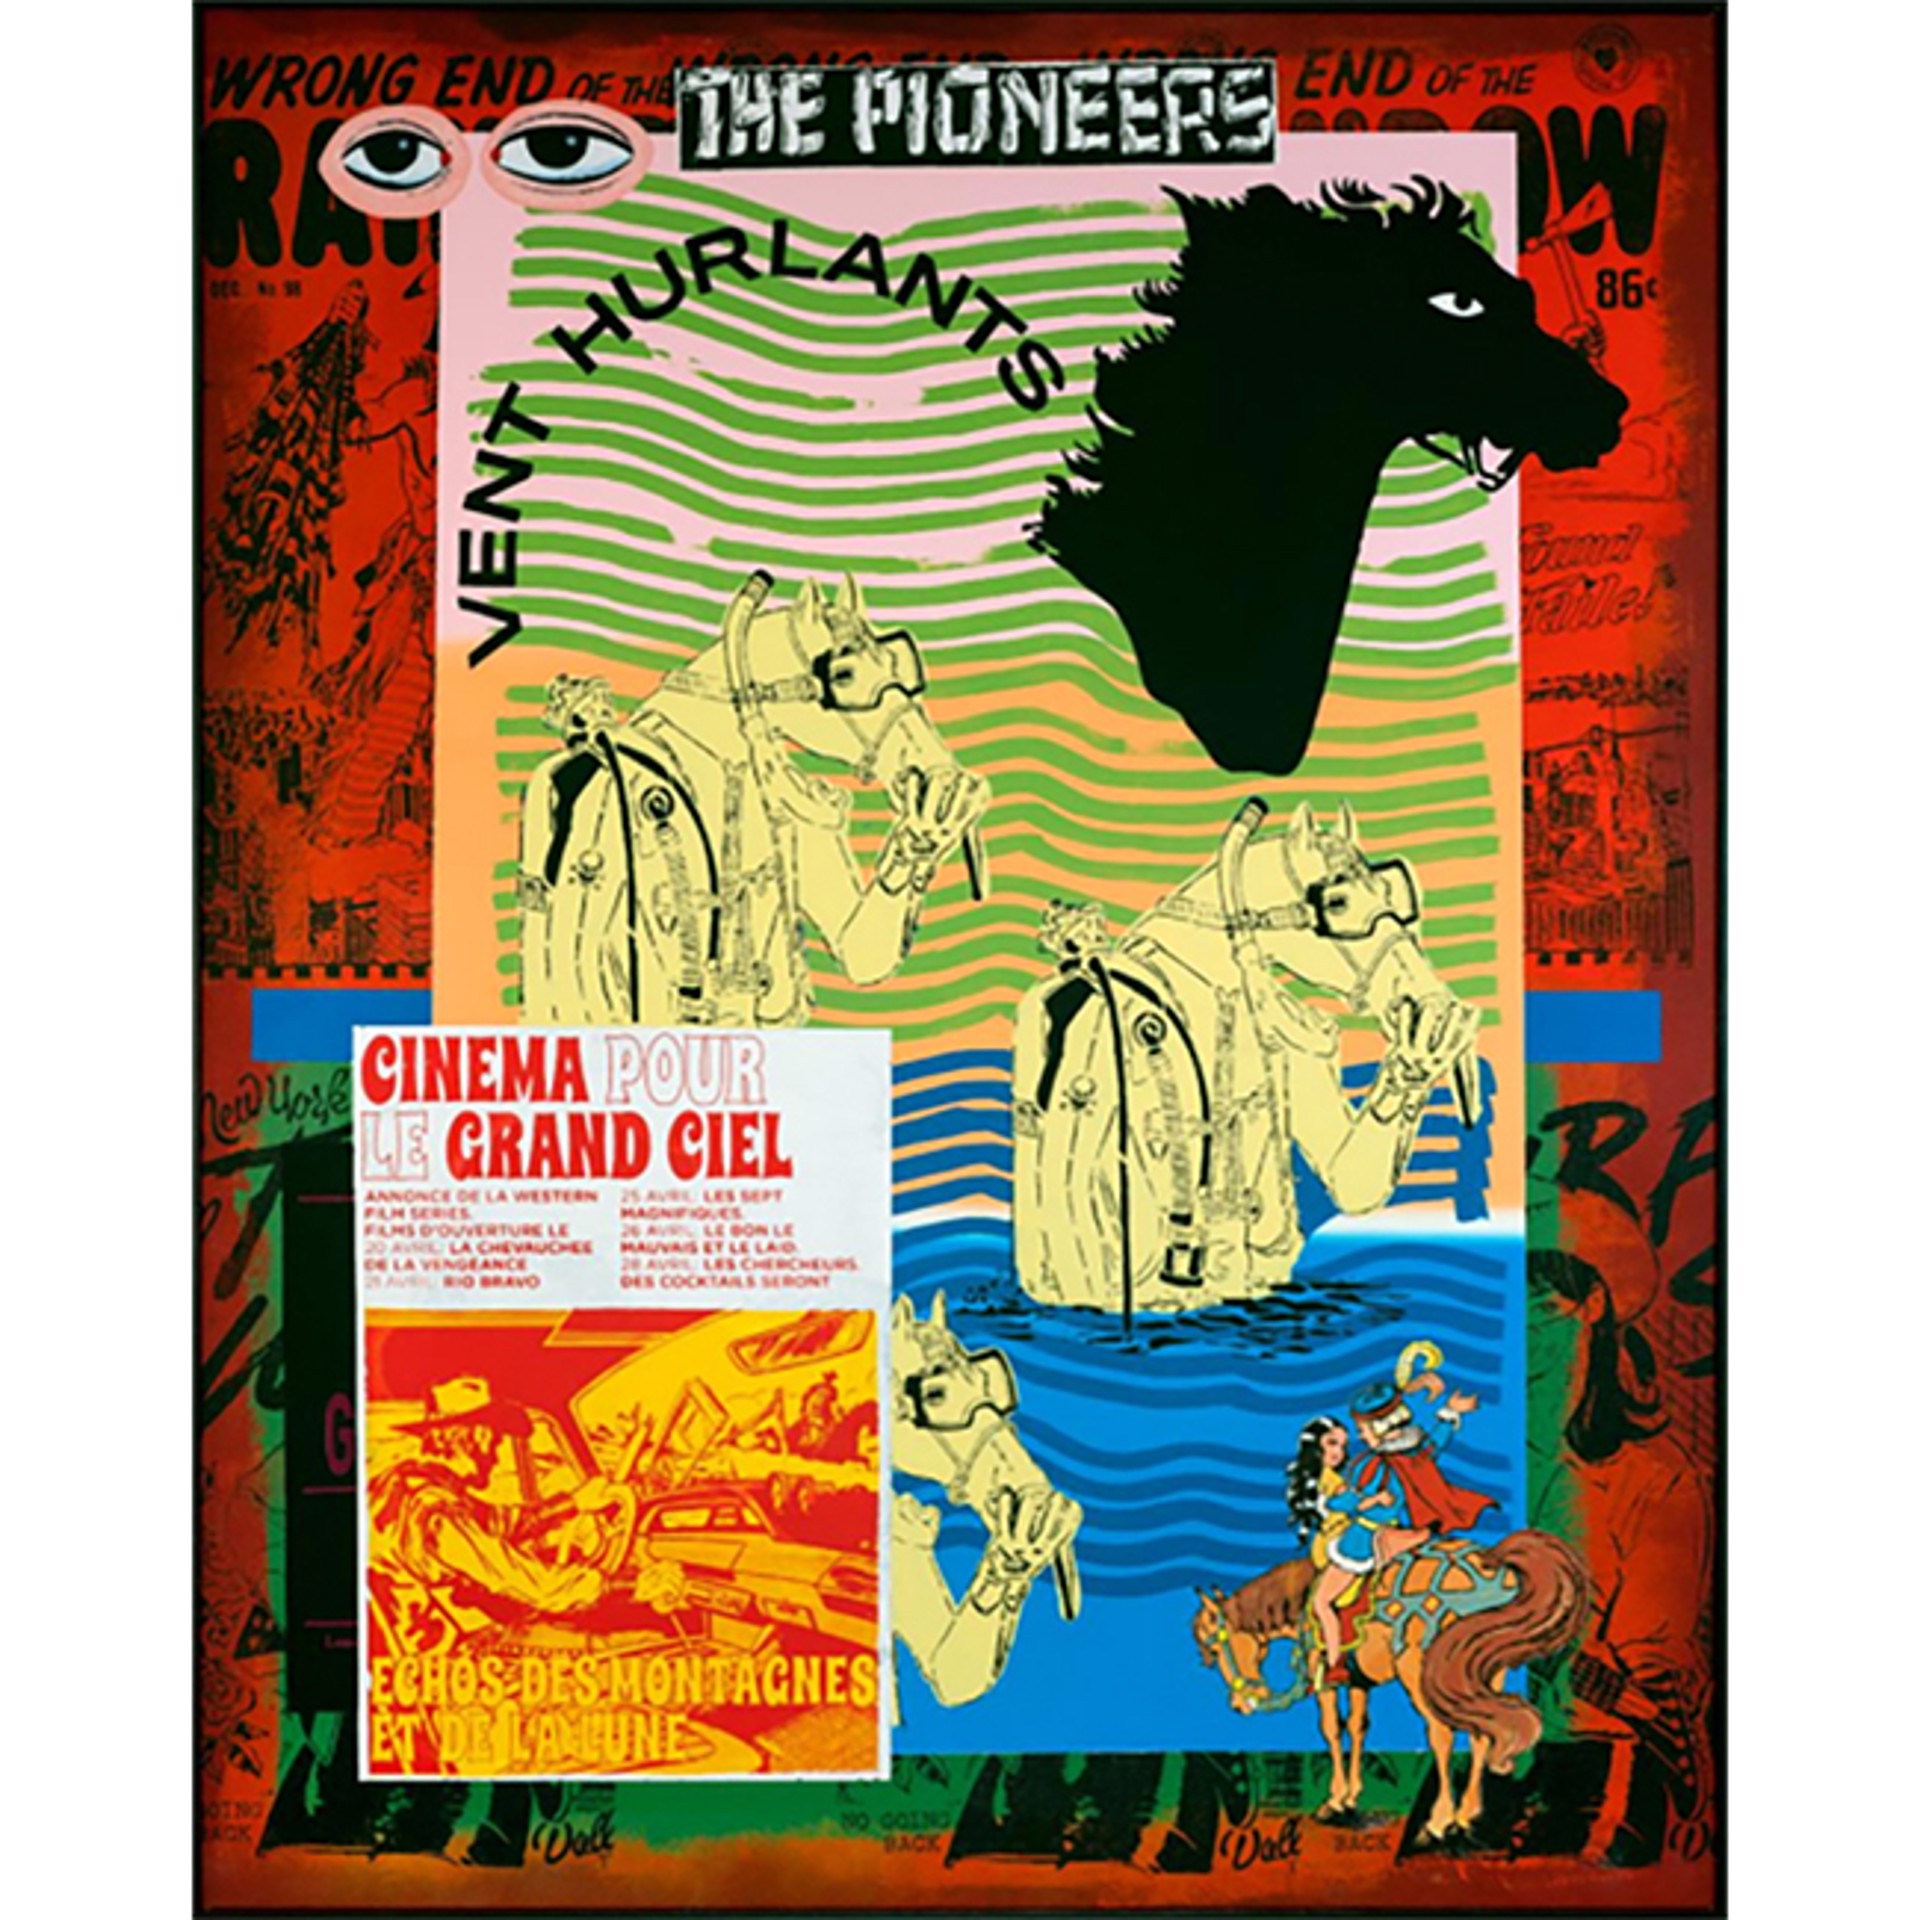 The Pioneers by FAILE